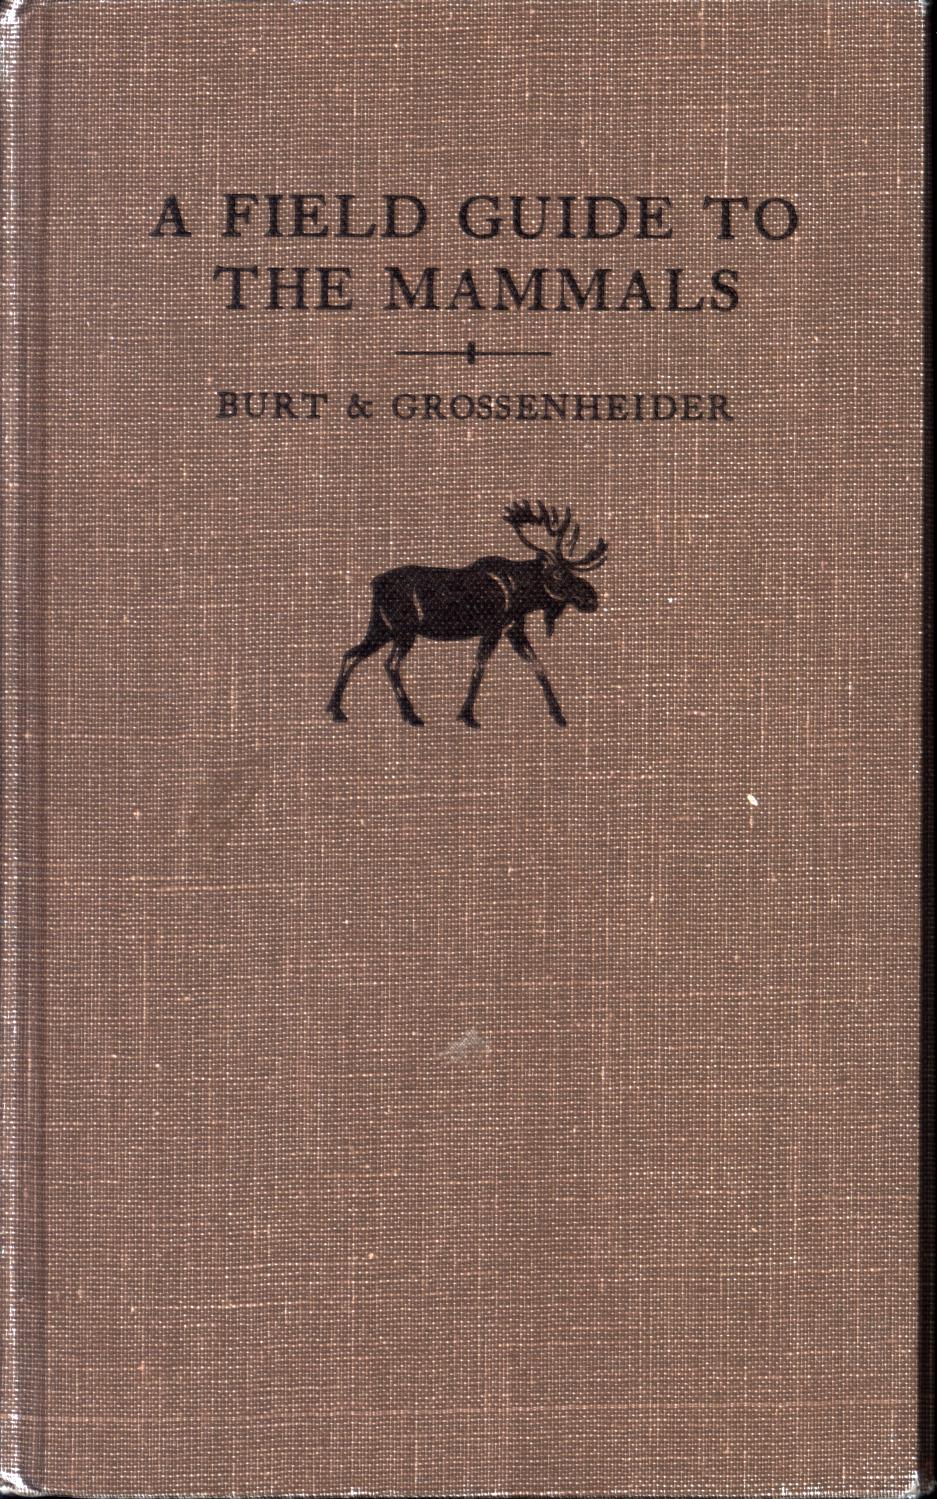 A FIELD GUIDE TO THE MAMMALS: giving field marks of all species north of Mexico.